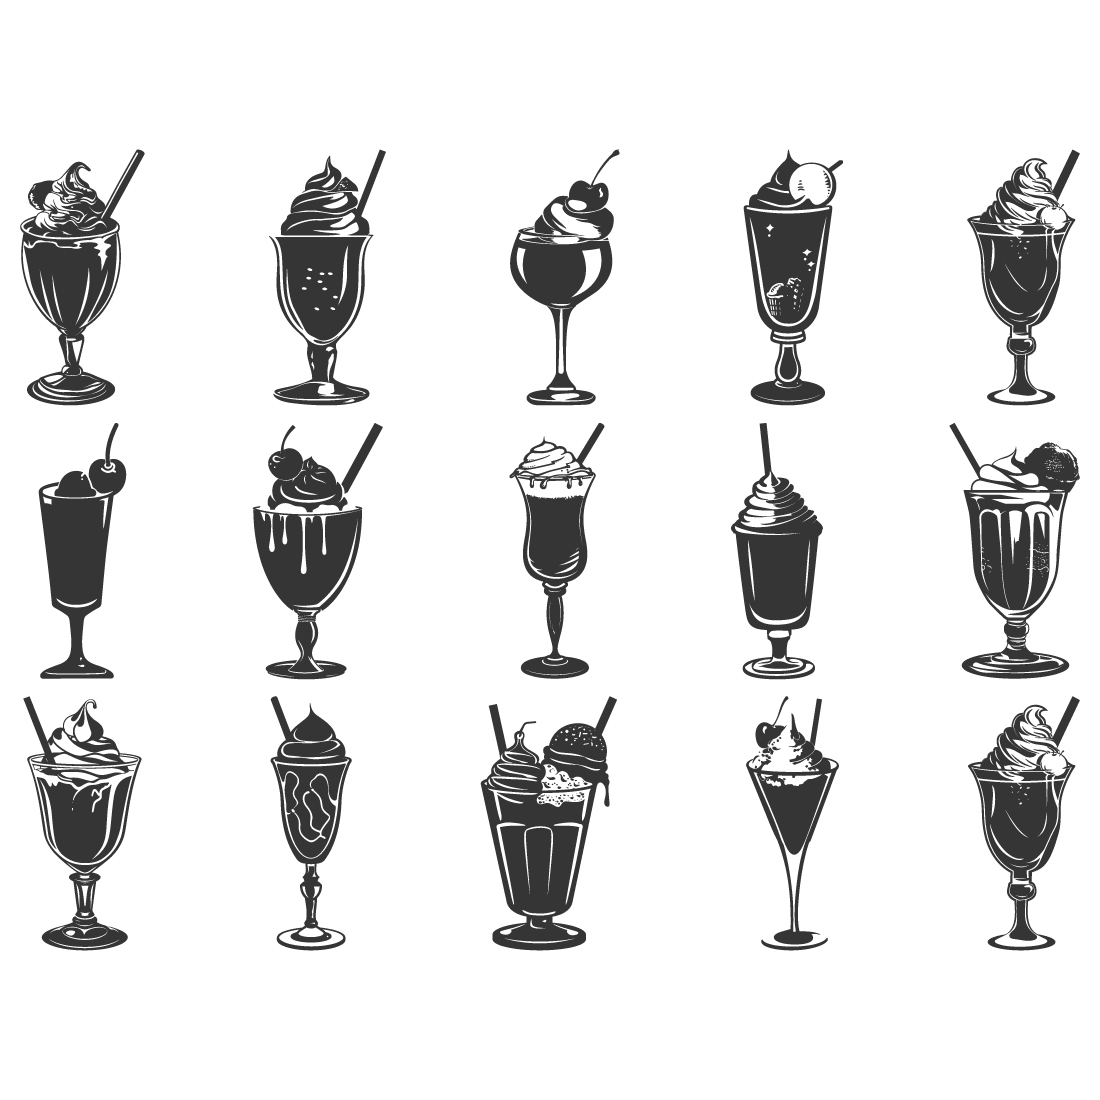 ice cream silhouette, different test drinks ice cream, Ice cream black silhouette icon set, Ice Cream icon Vector cover image.